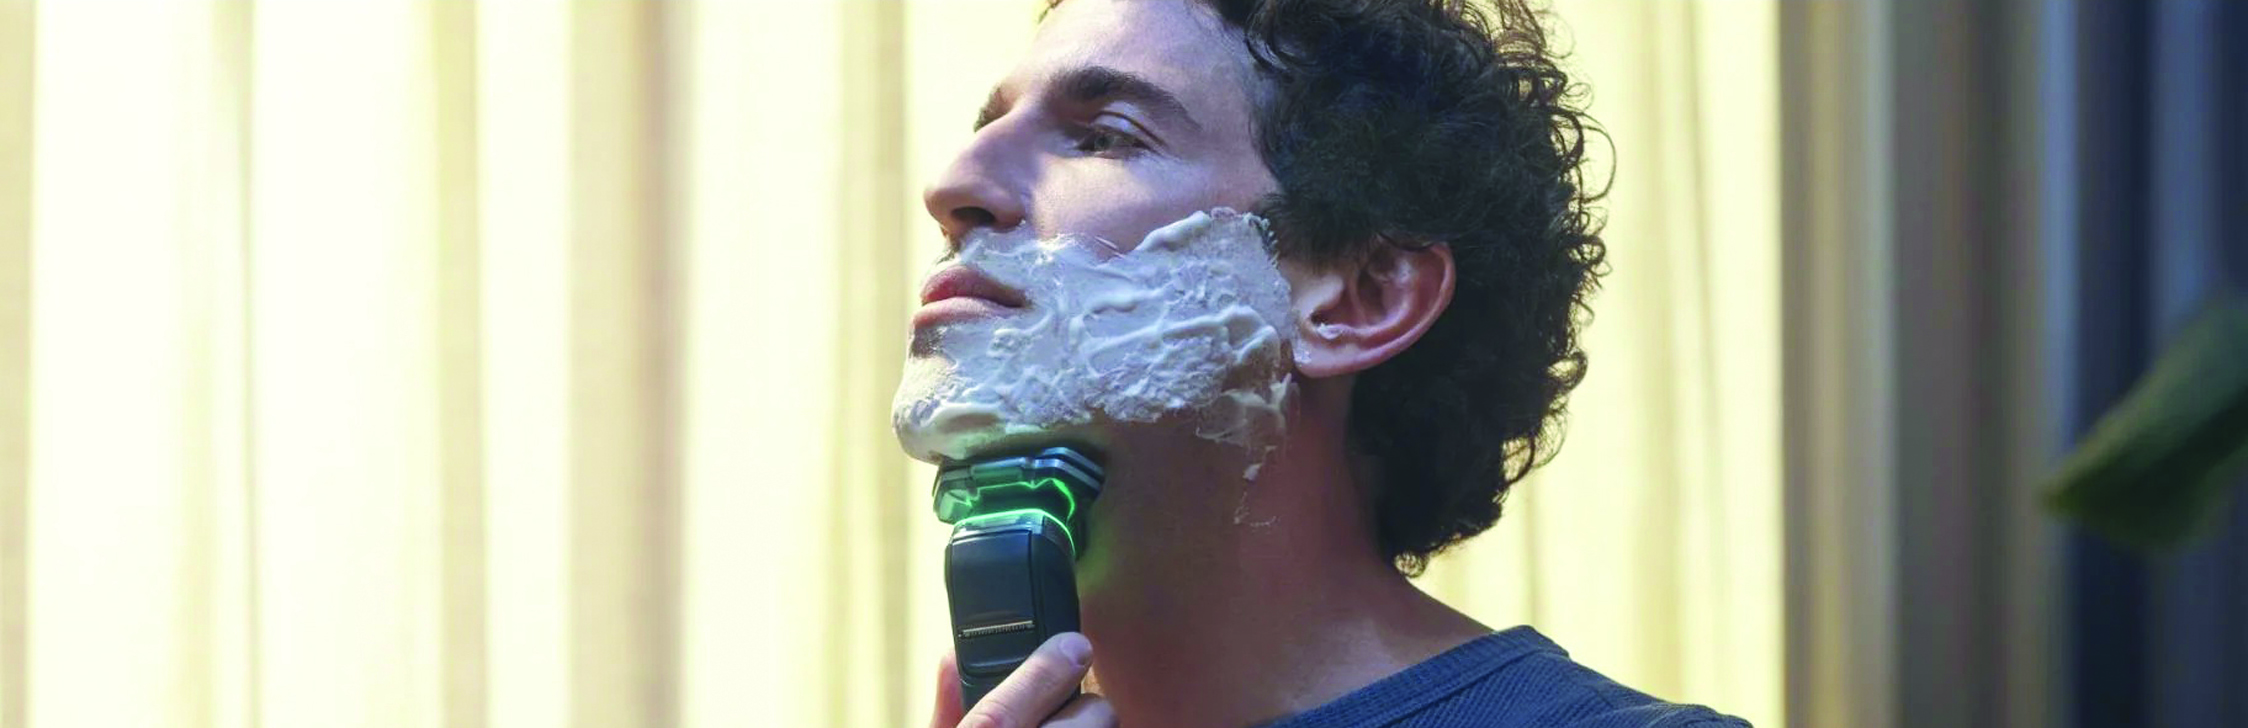 Your essential guide to shaving, trimming, and hair removal - JB Hi-Fi